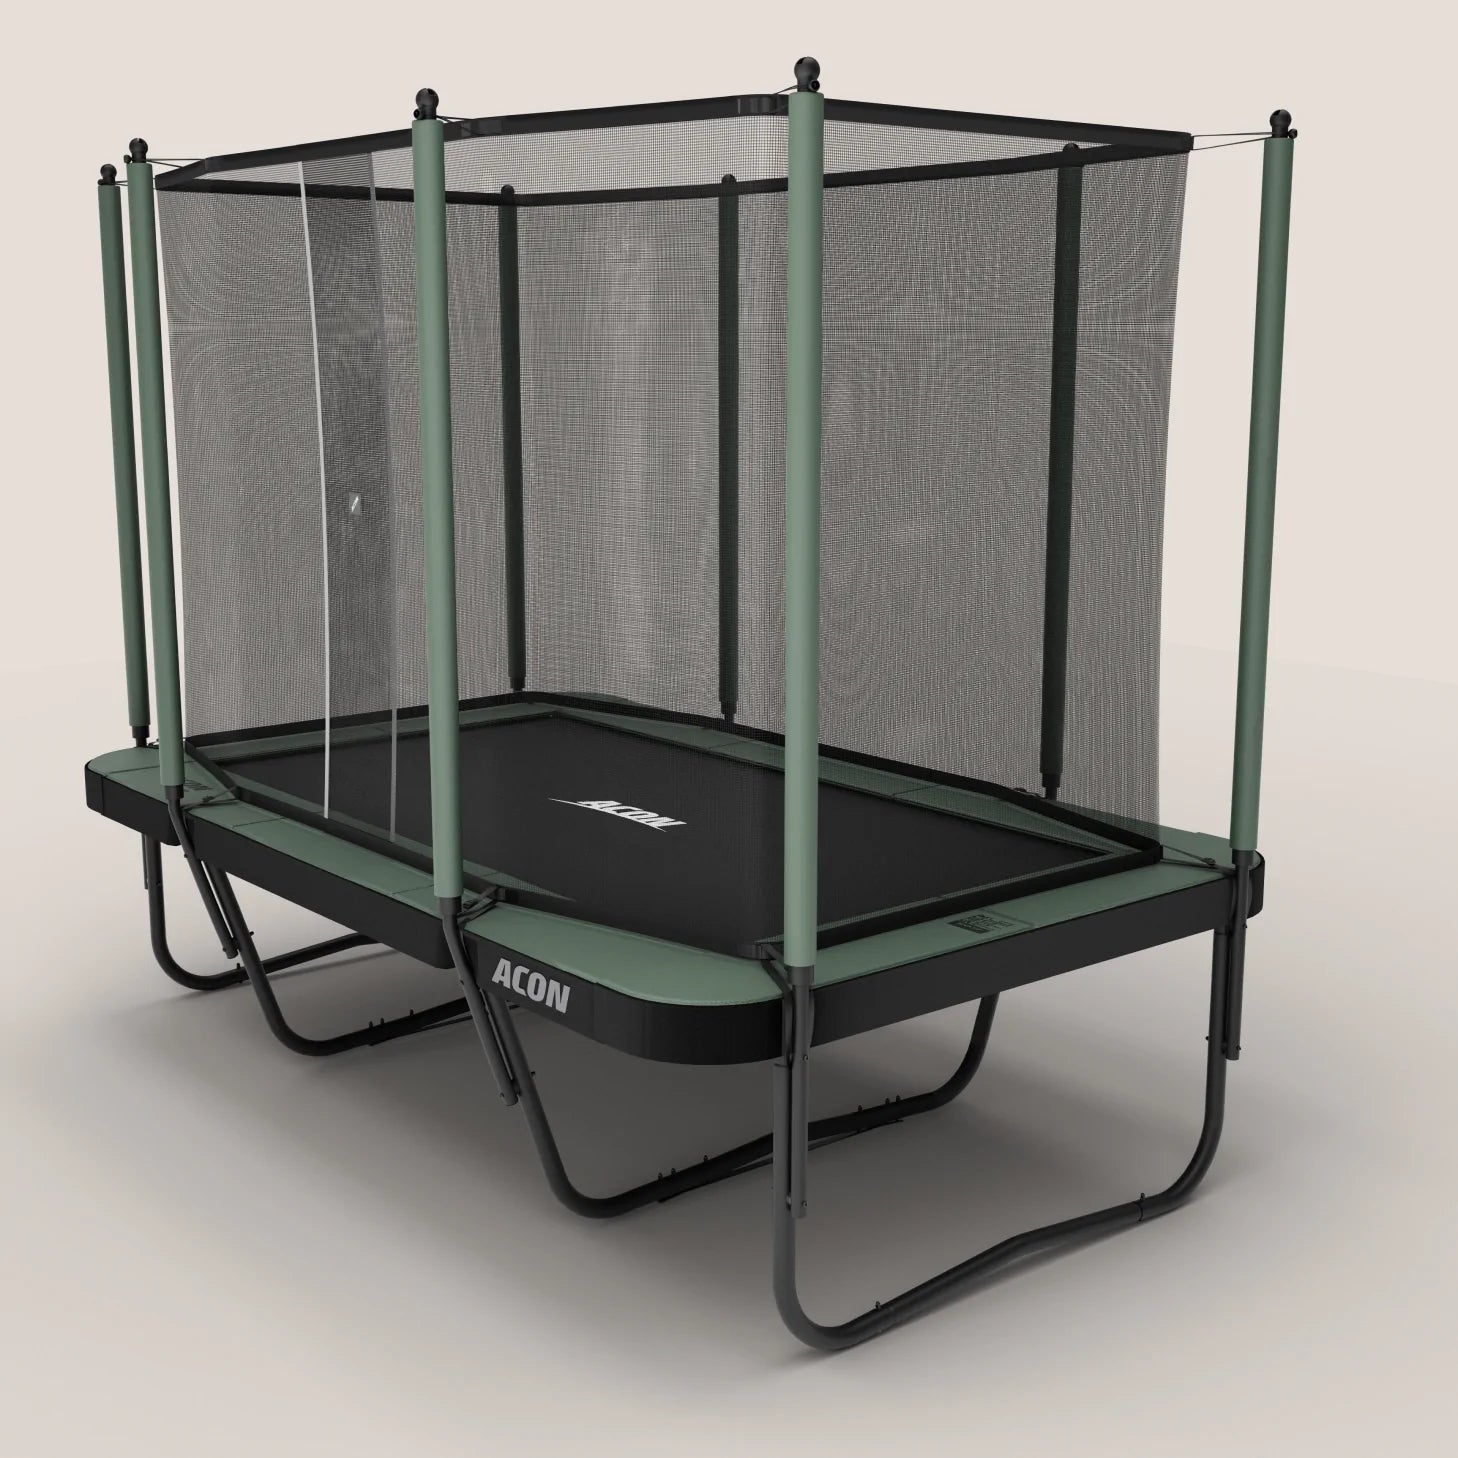 Acon Air 16 Sport HD trampoline with enclosure on a beige background 